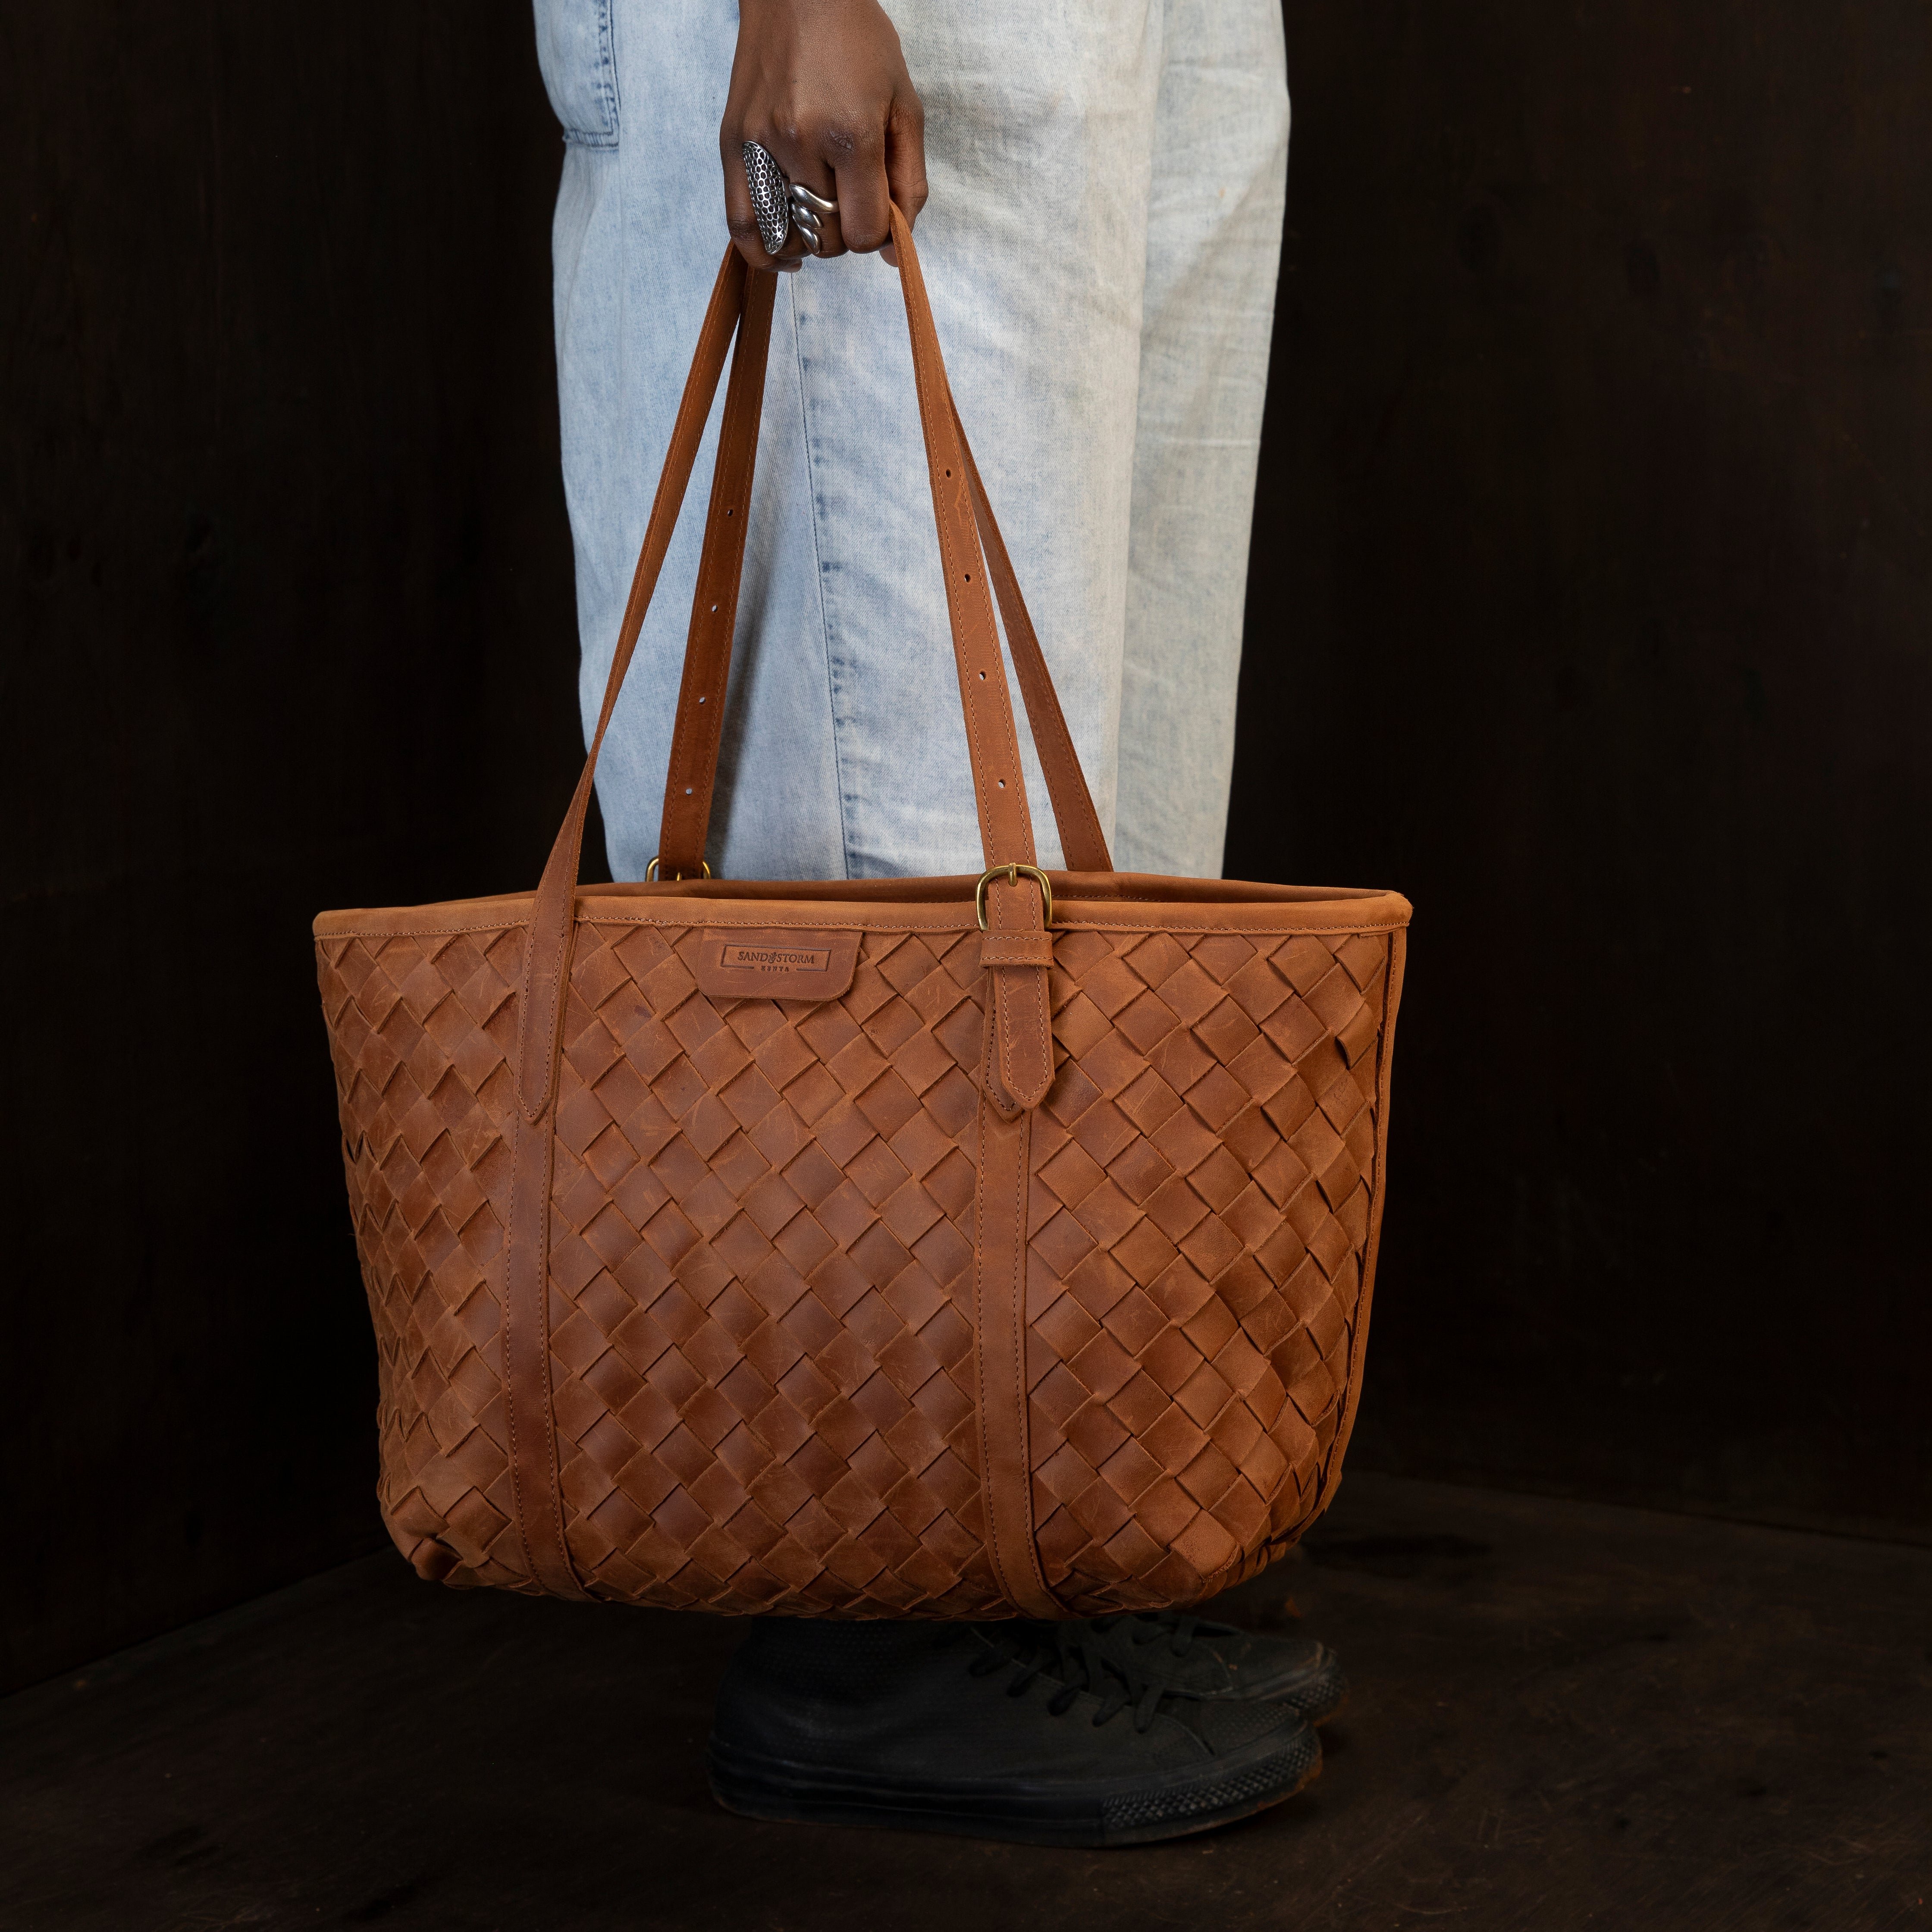 Pull-up Leather Woven Tote